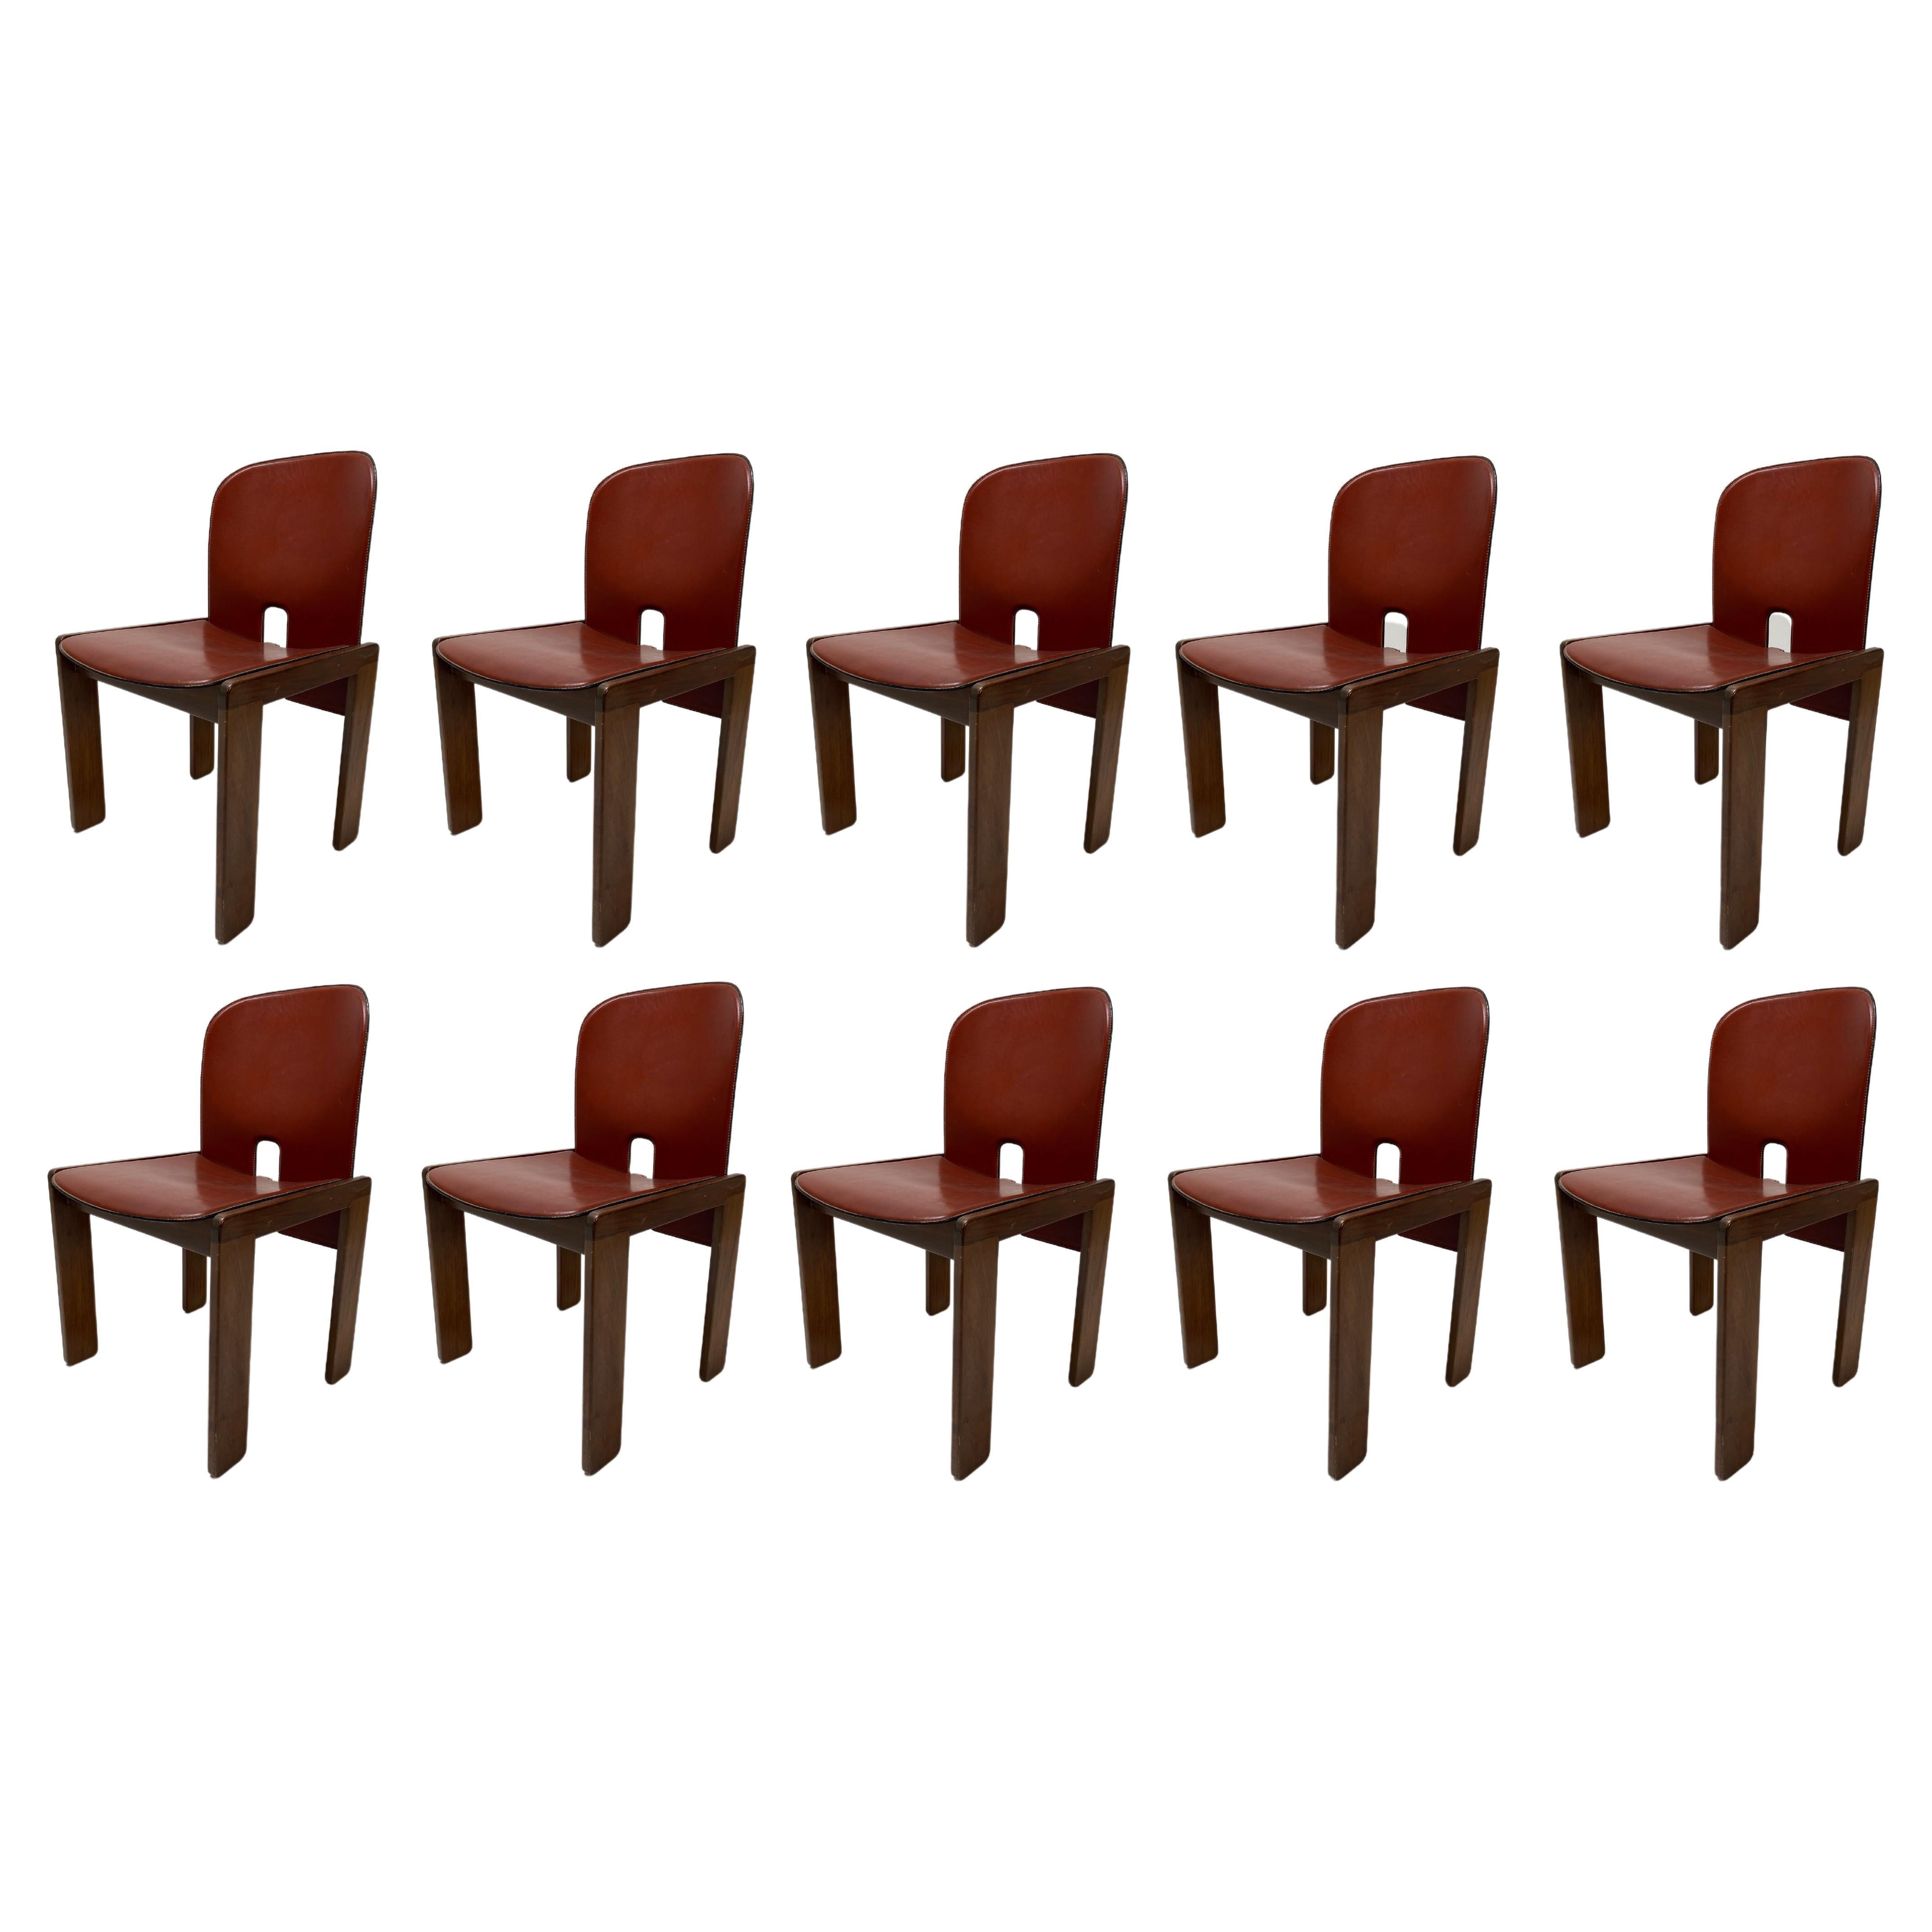 Set of 10 Red Lether 121 Chairs, Afra & Tobia Scarpa, Cassina, Italy, 1967